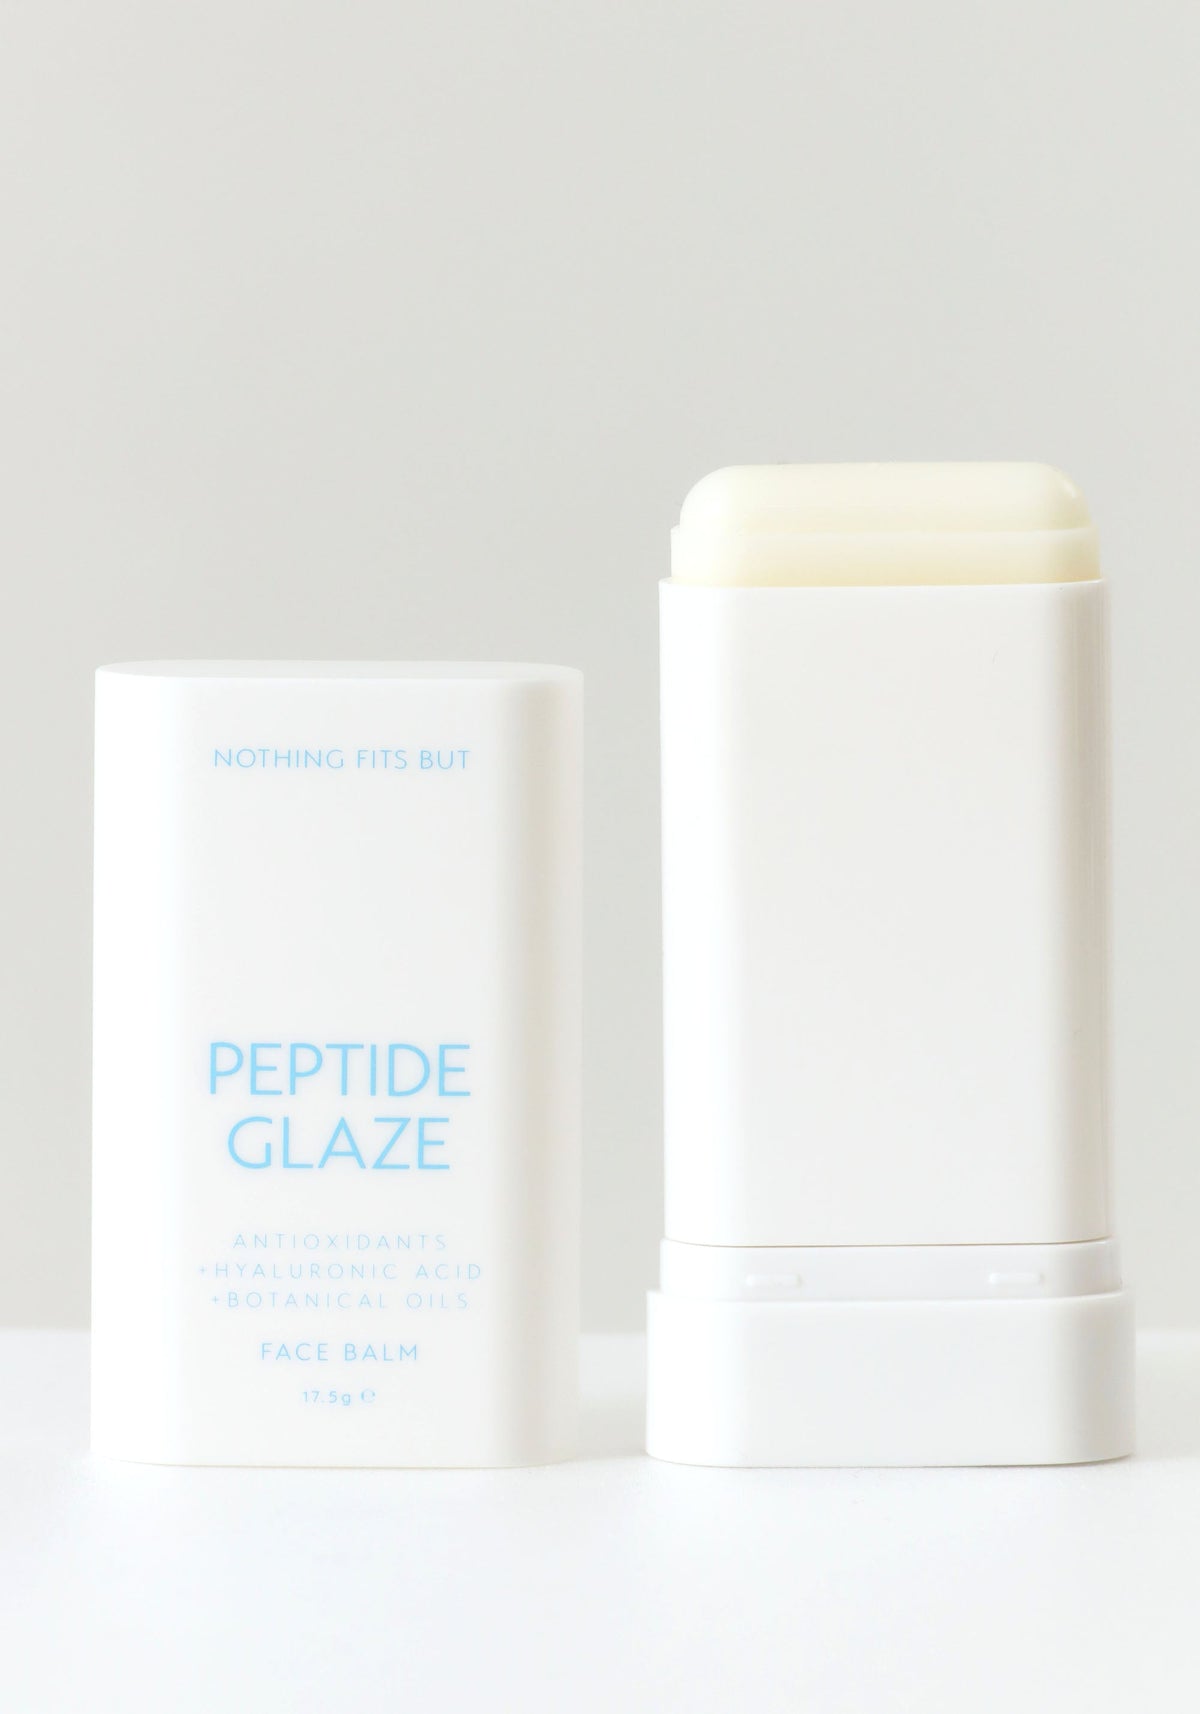 SUPER SOOTHING & MOISTURIZING PEPTIDE BALM STICK FOR FACE & LIPS